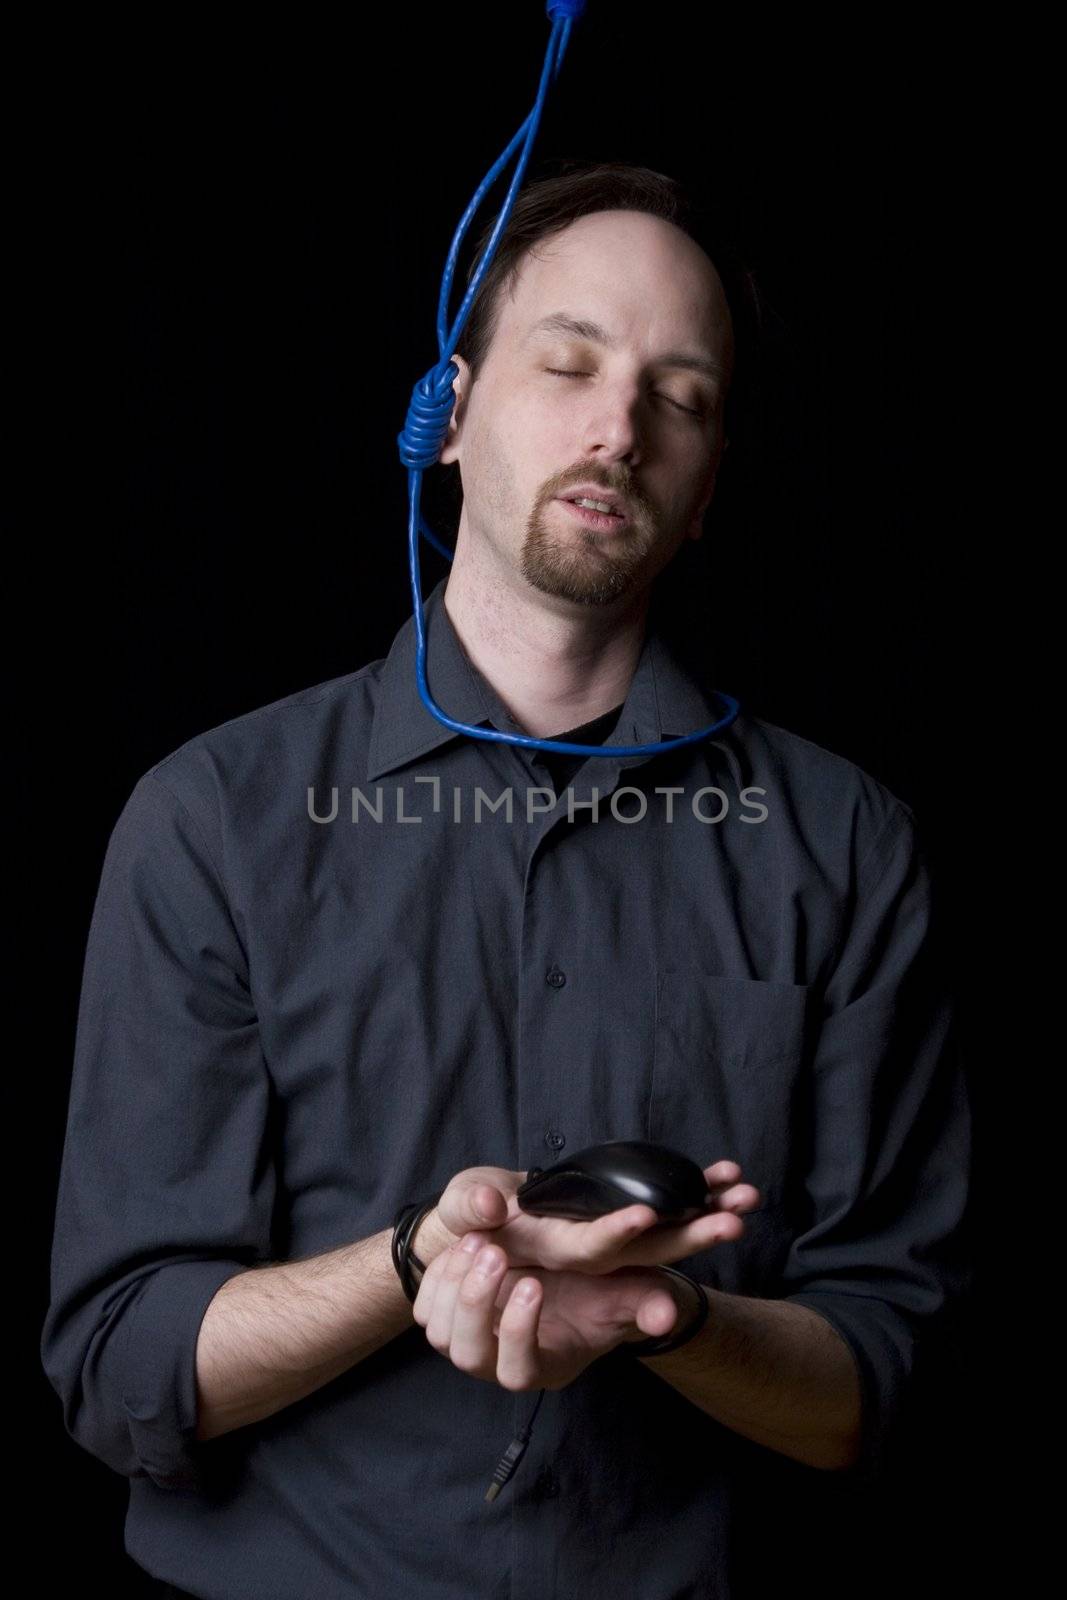 Computer technician with tied hands and hangman noeuce around his neck, accepting his faith and closing his eyes